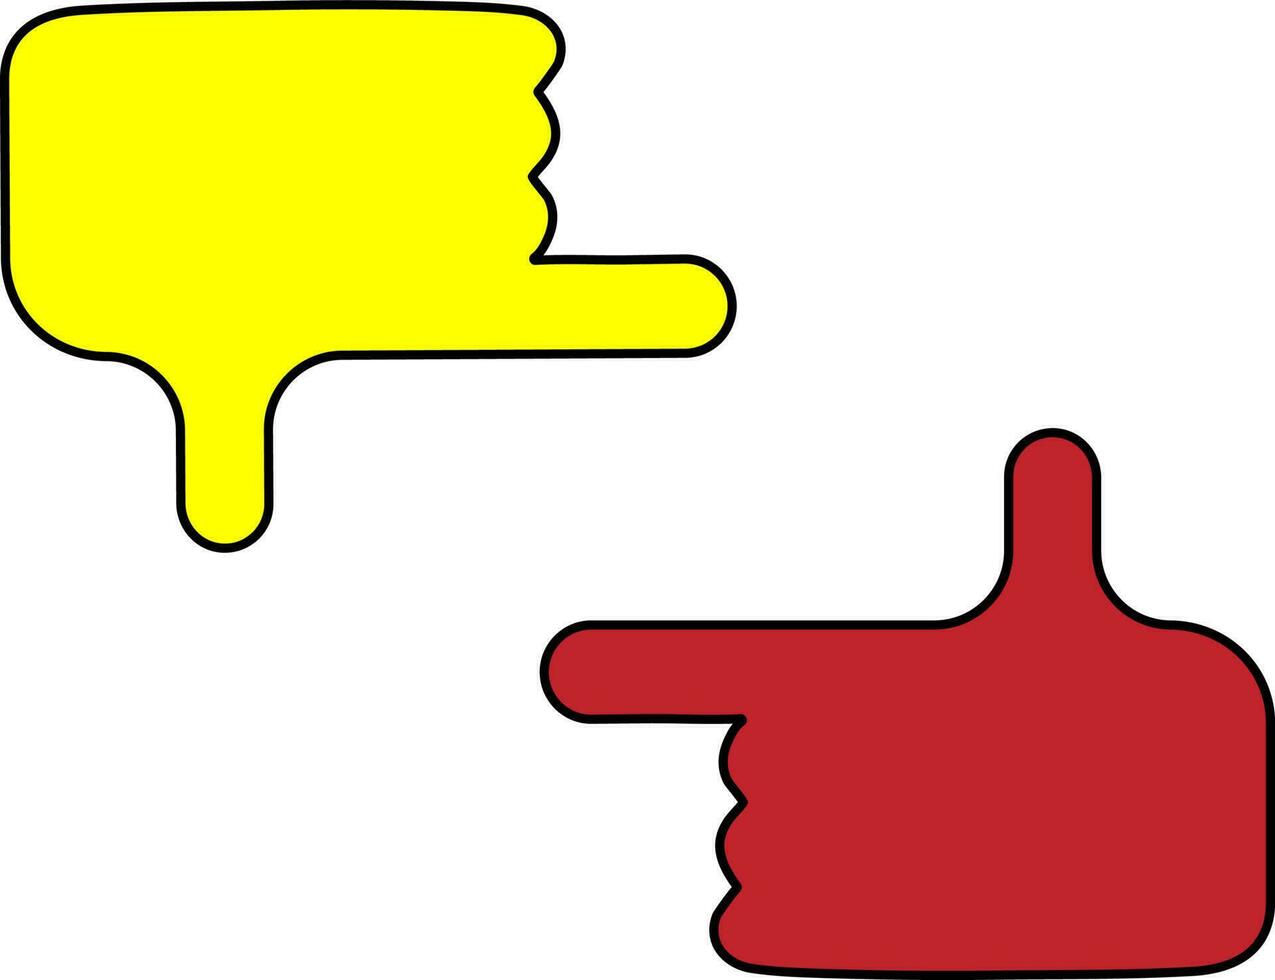 Capturing hands by camera in yellow and red color. vector